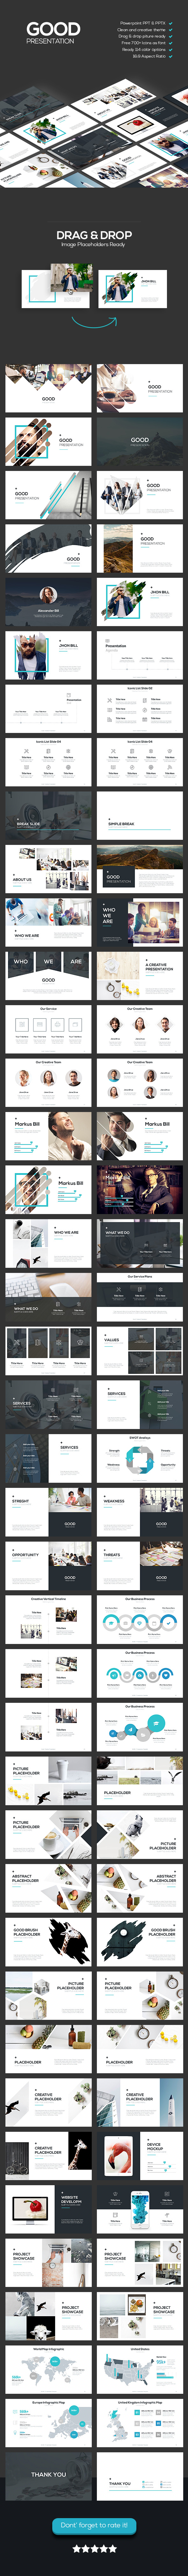 Good - Creative Theme by seventhin | GraphicRiver